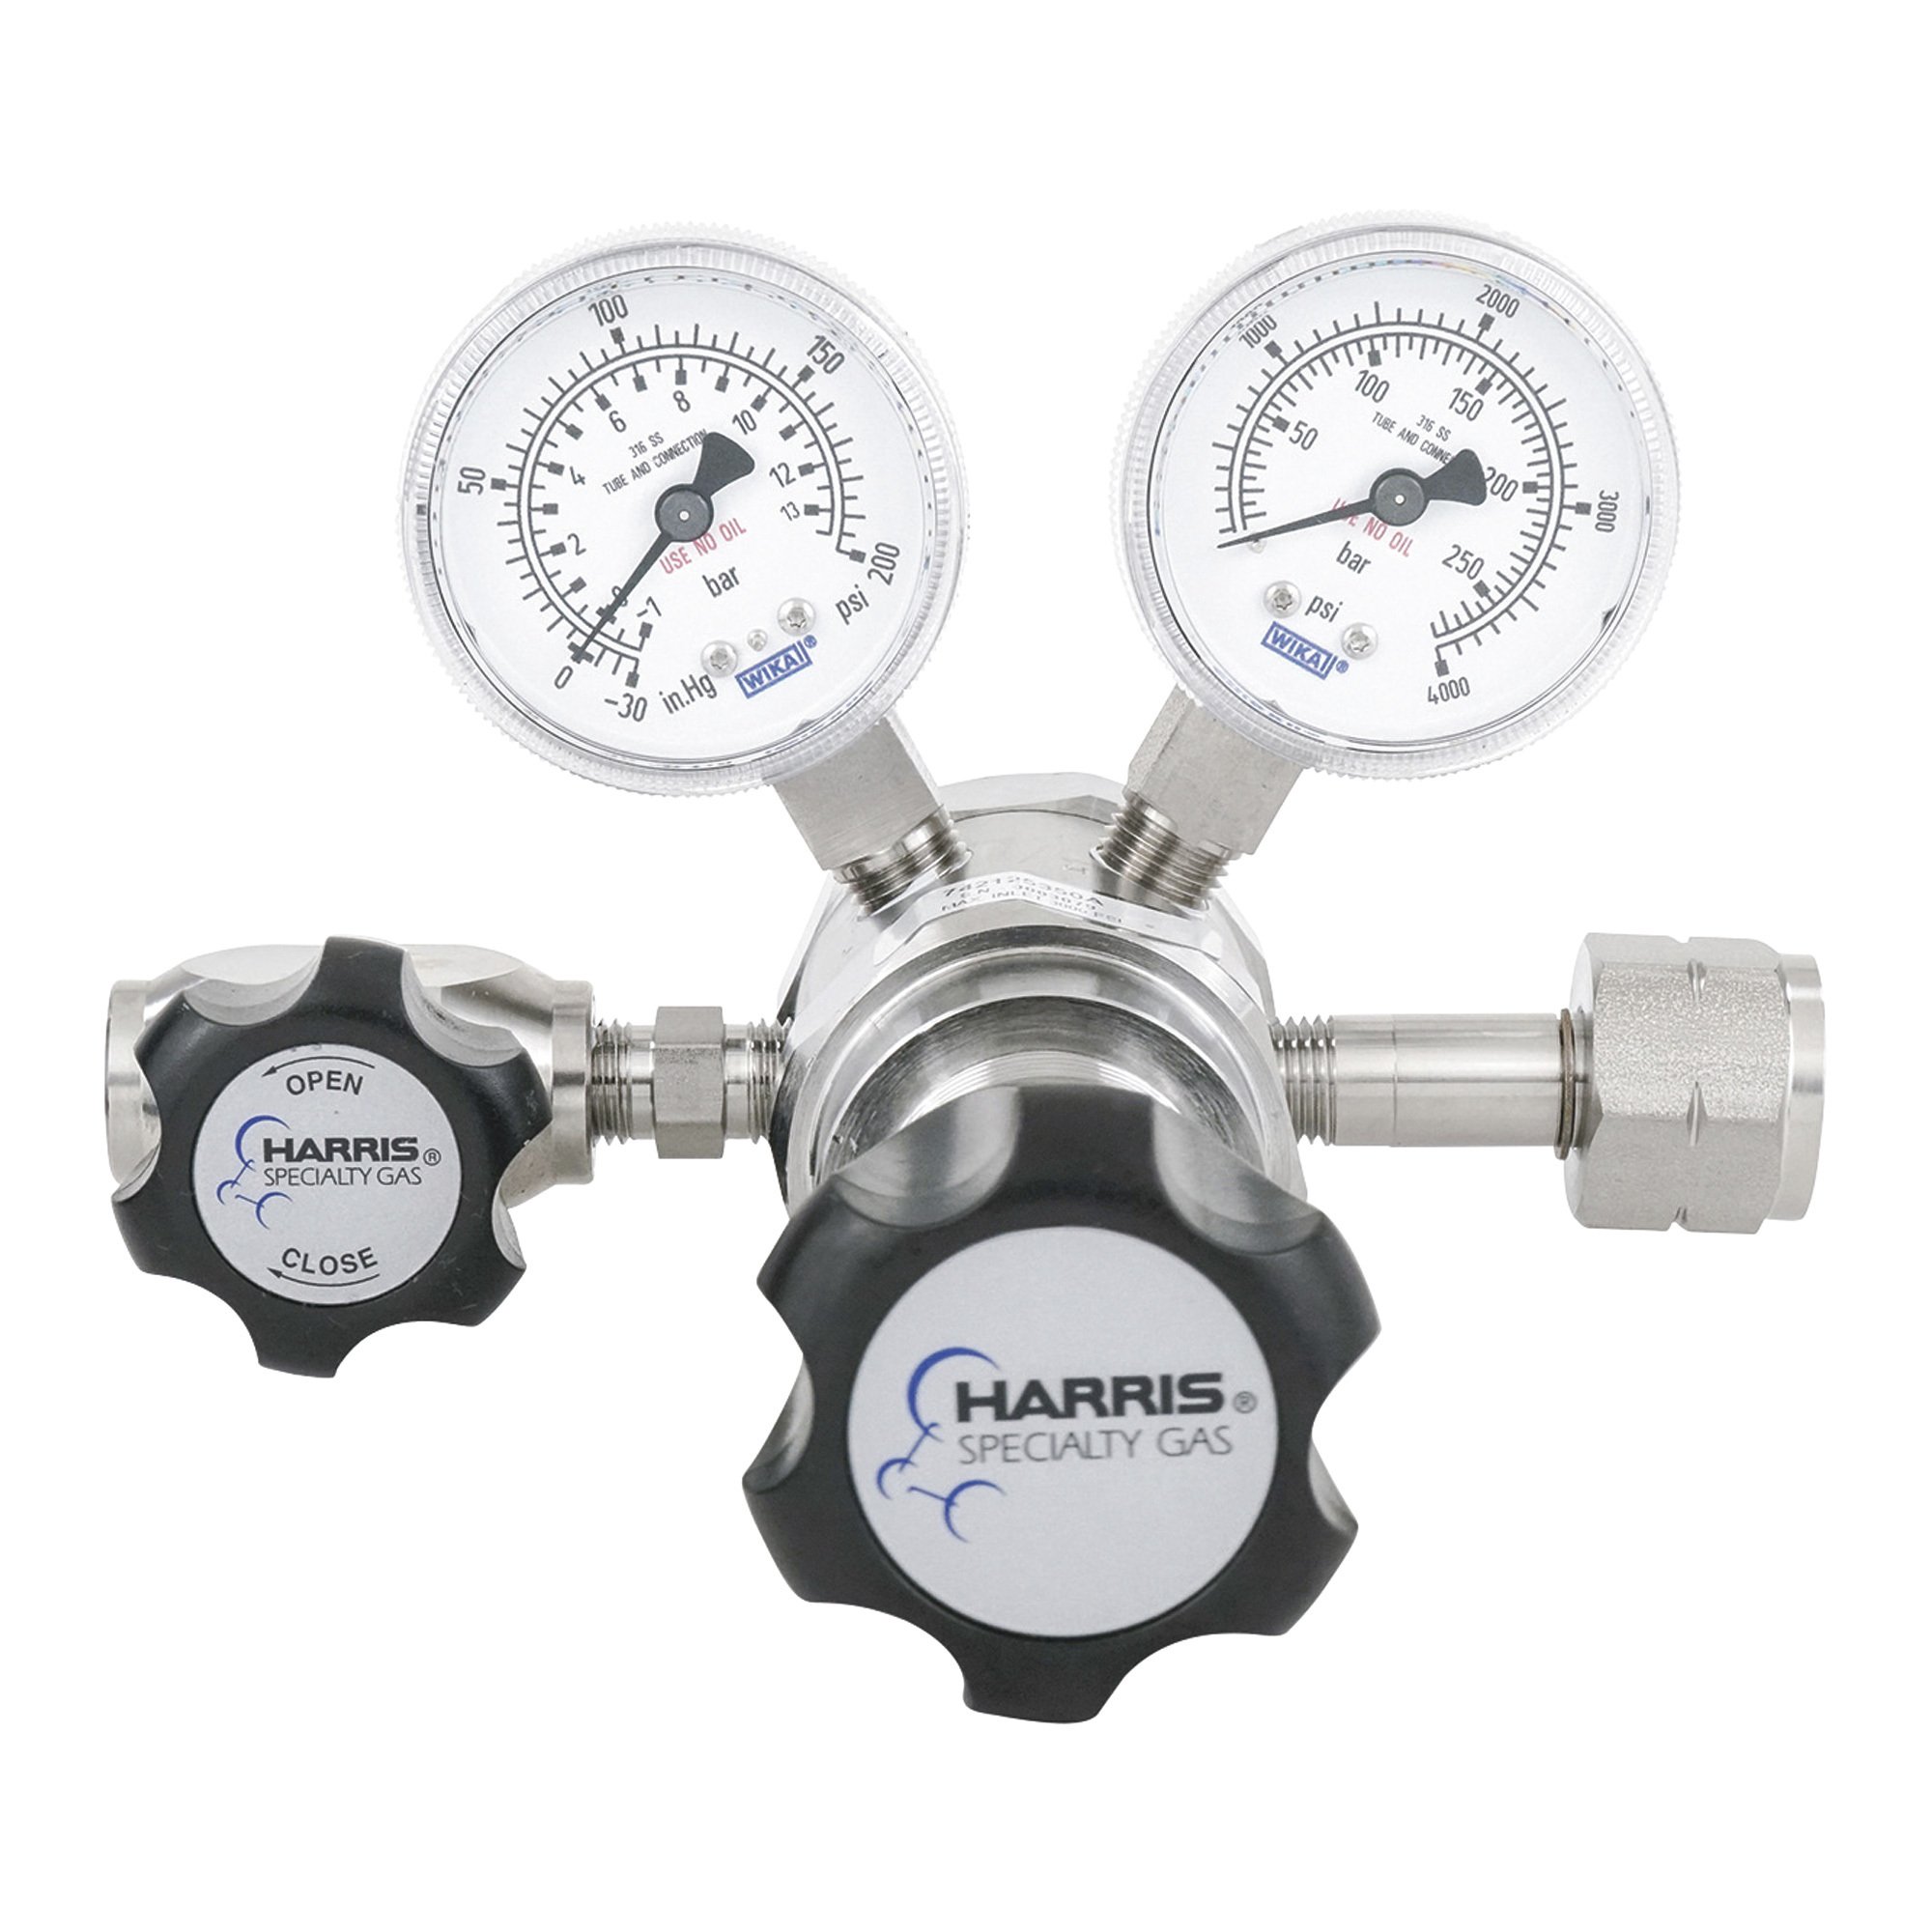 Harris Hydrogen and Flammable Specialty Gas Lab Regulator — CGA 350,  Two-Stage, 316 Stainless Steel, 0–125 PSI, Model# HP742-125-350-A  Northern Tool